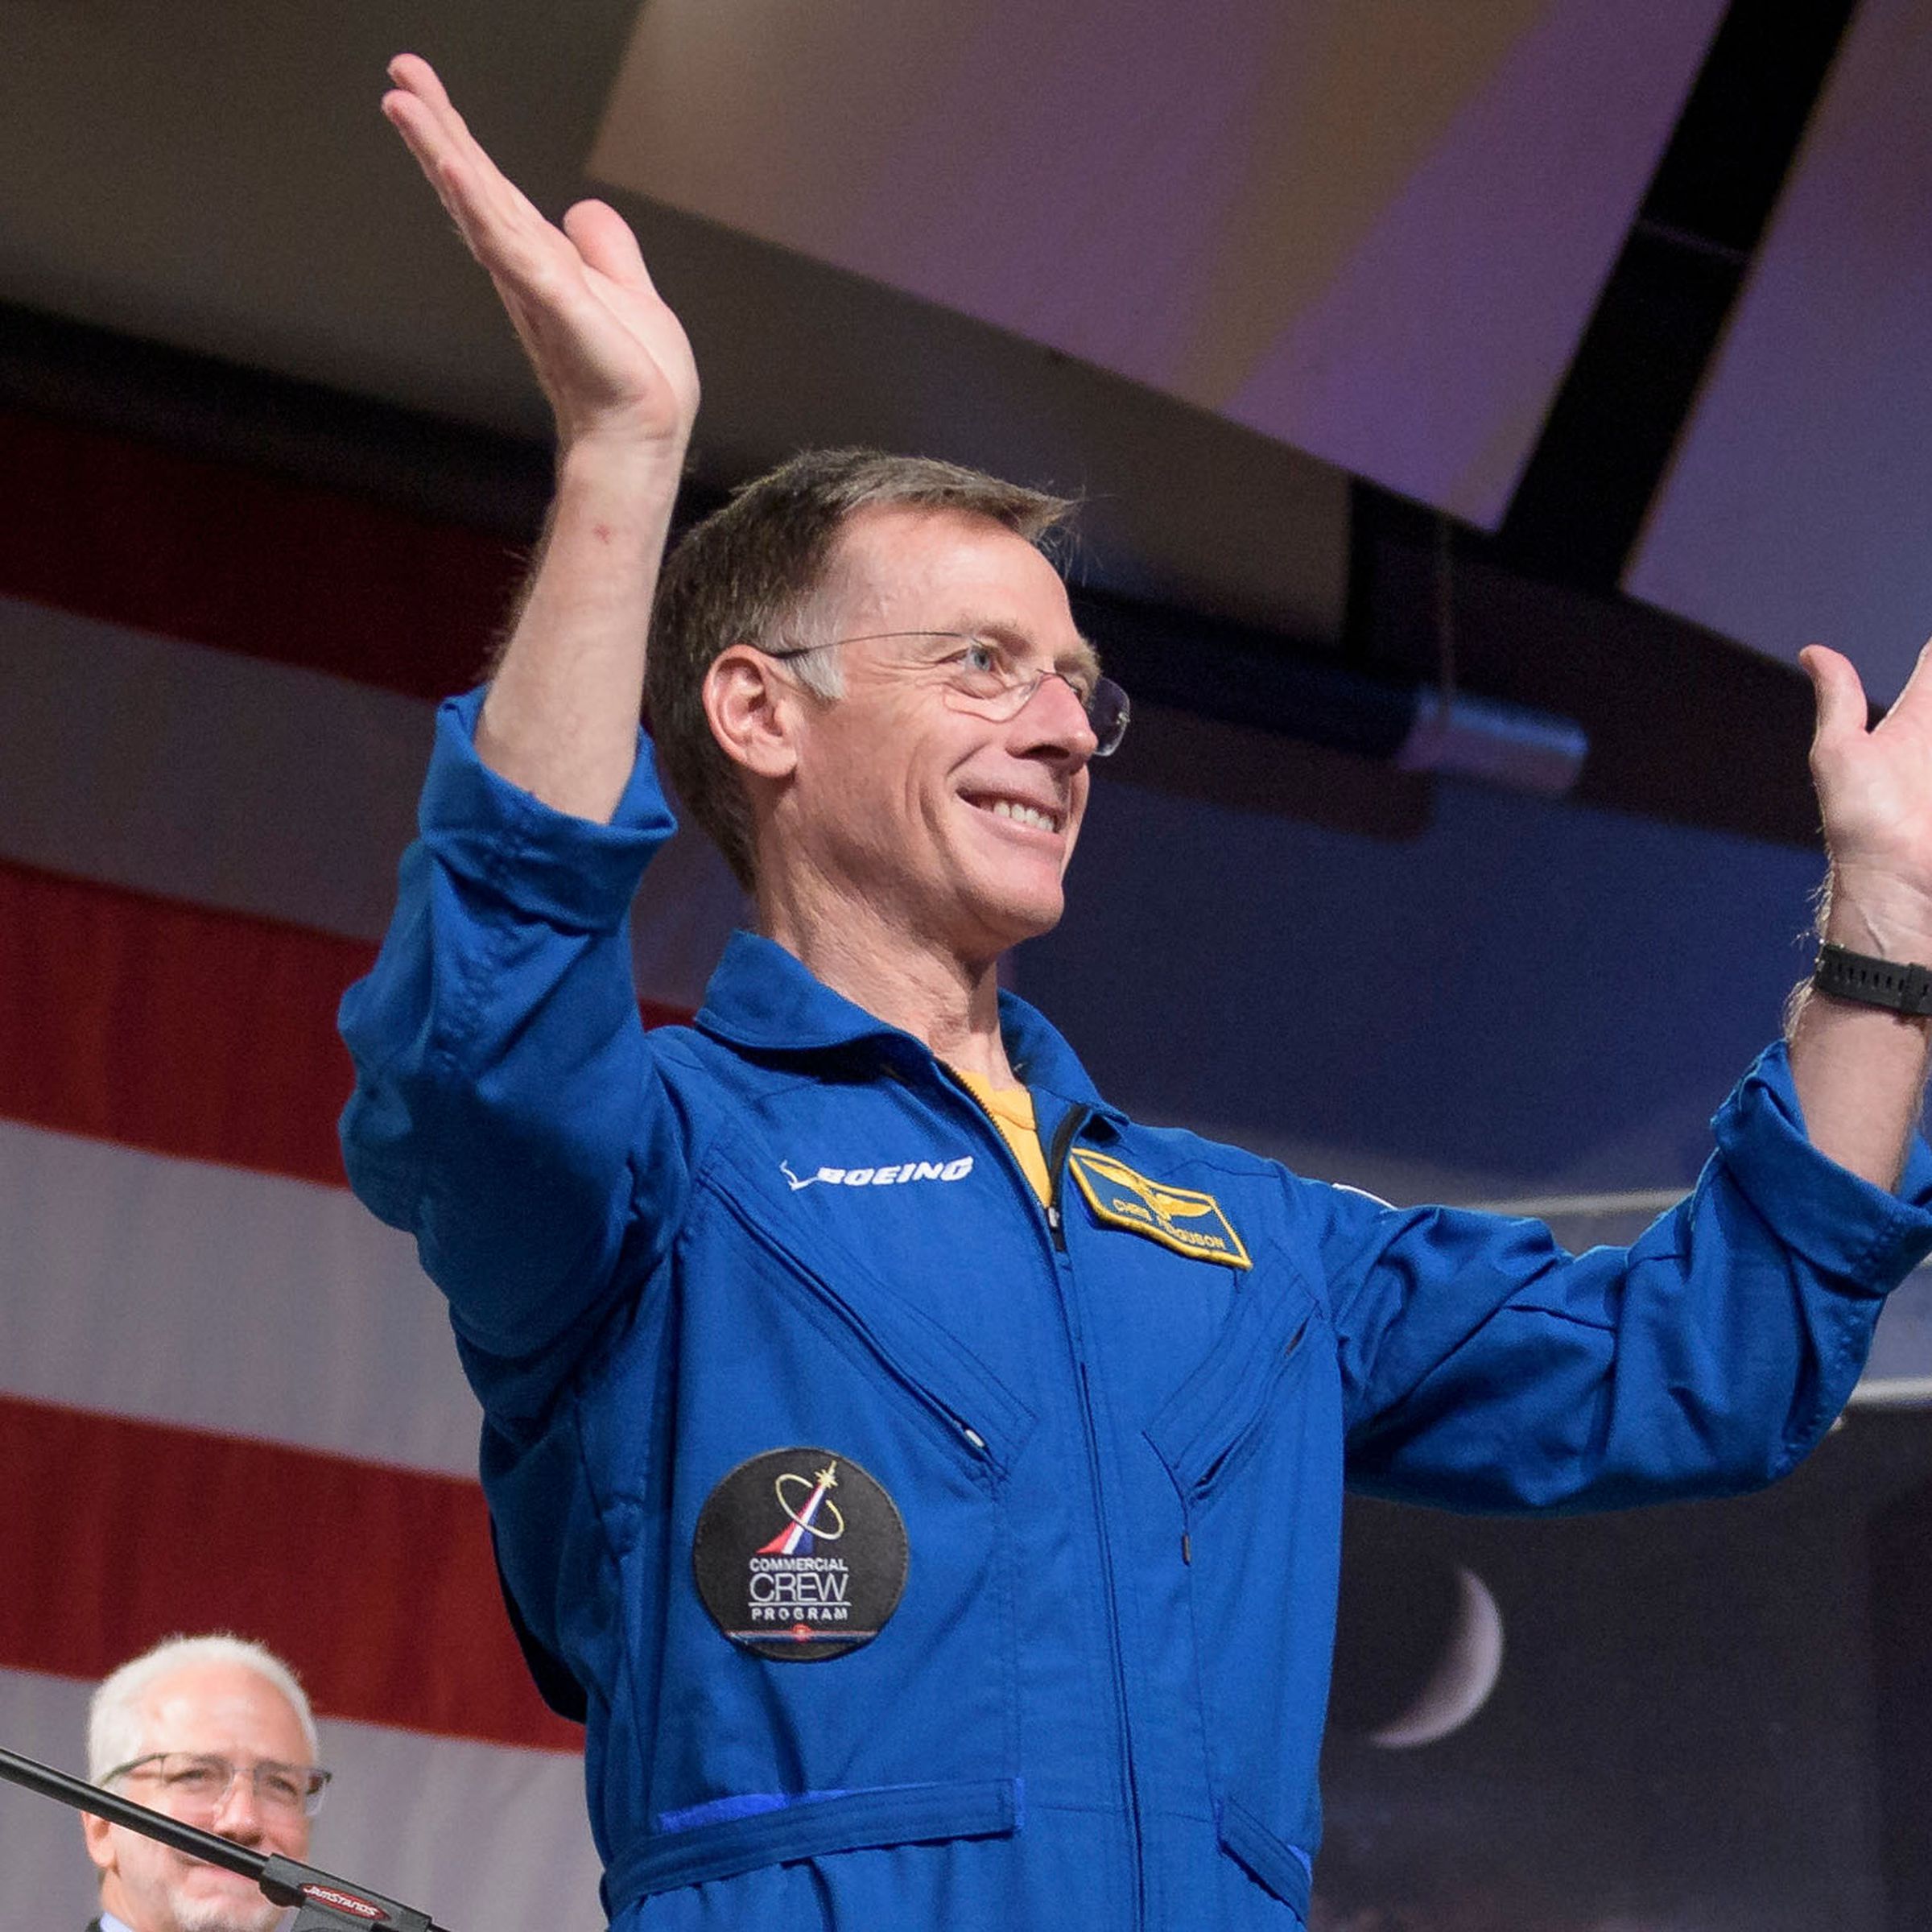 Chris Ferguson, after NASA announced his assignment to the Starliner mission